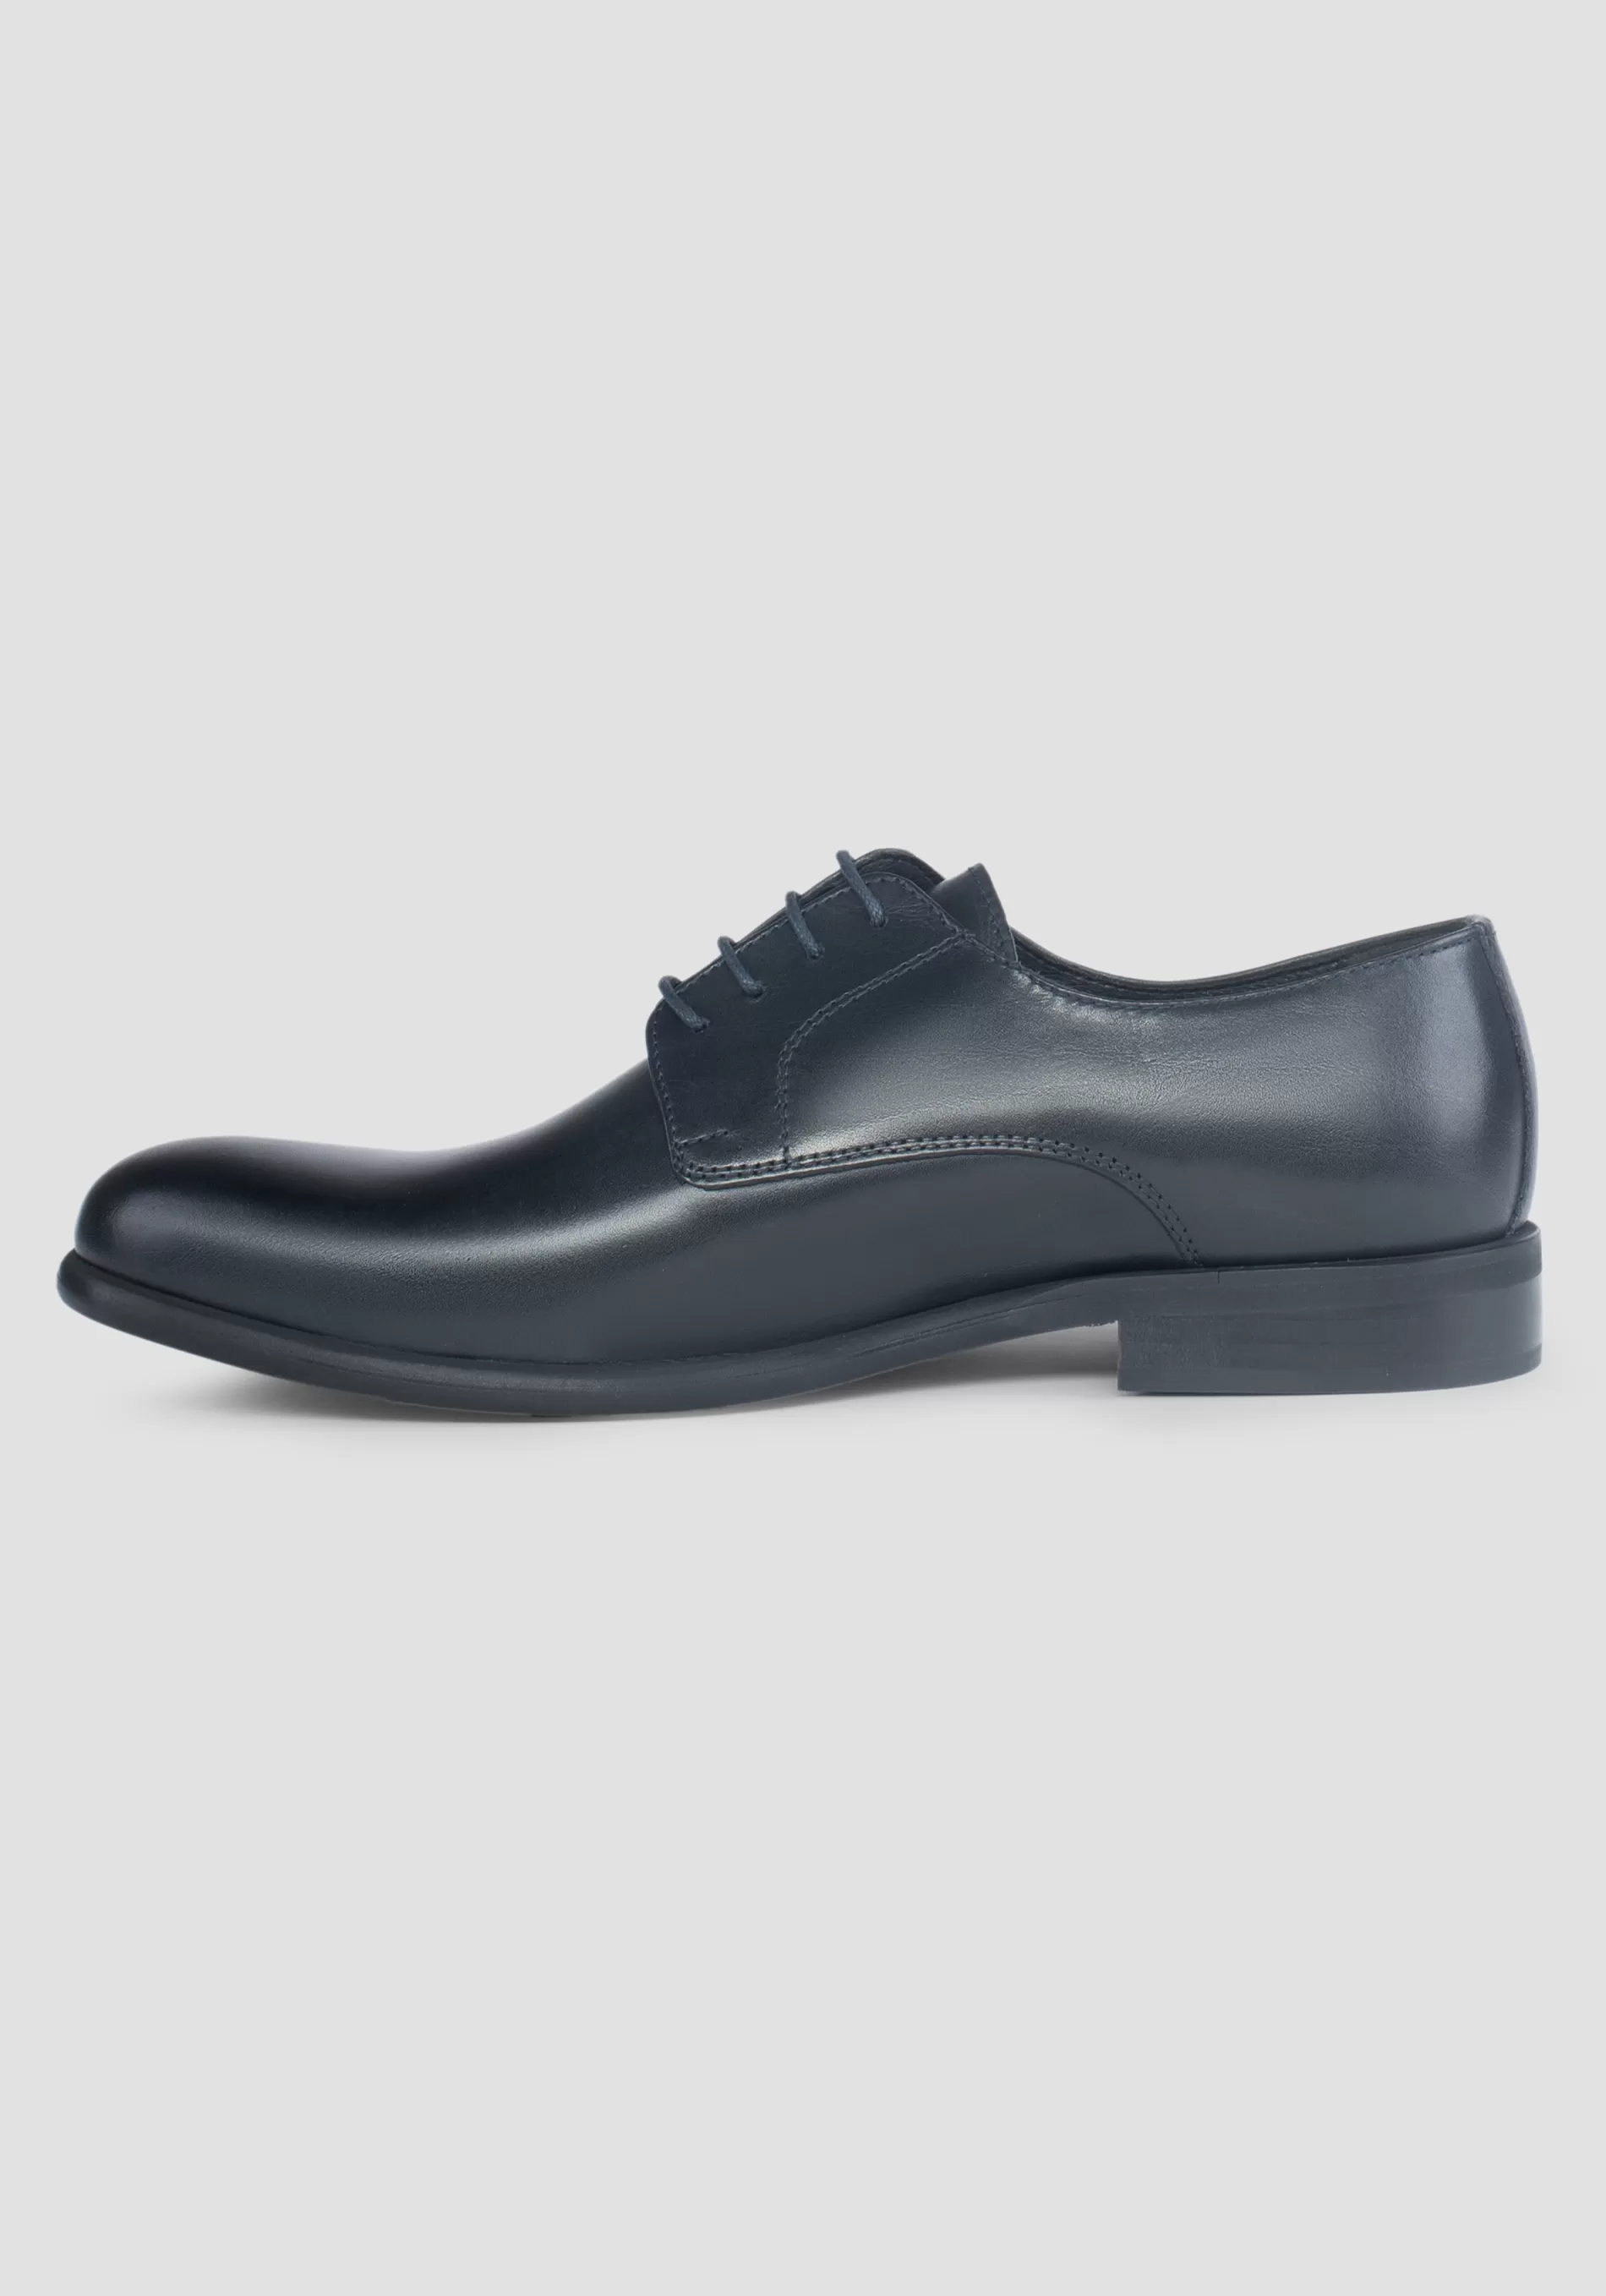 Outlet "HURT" LEATHER DERBY Formal shoes